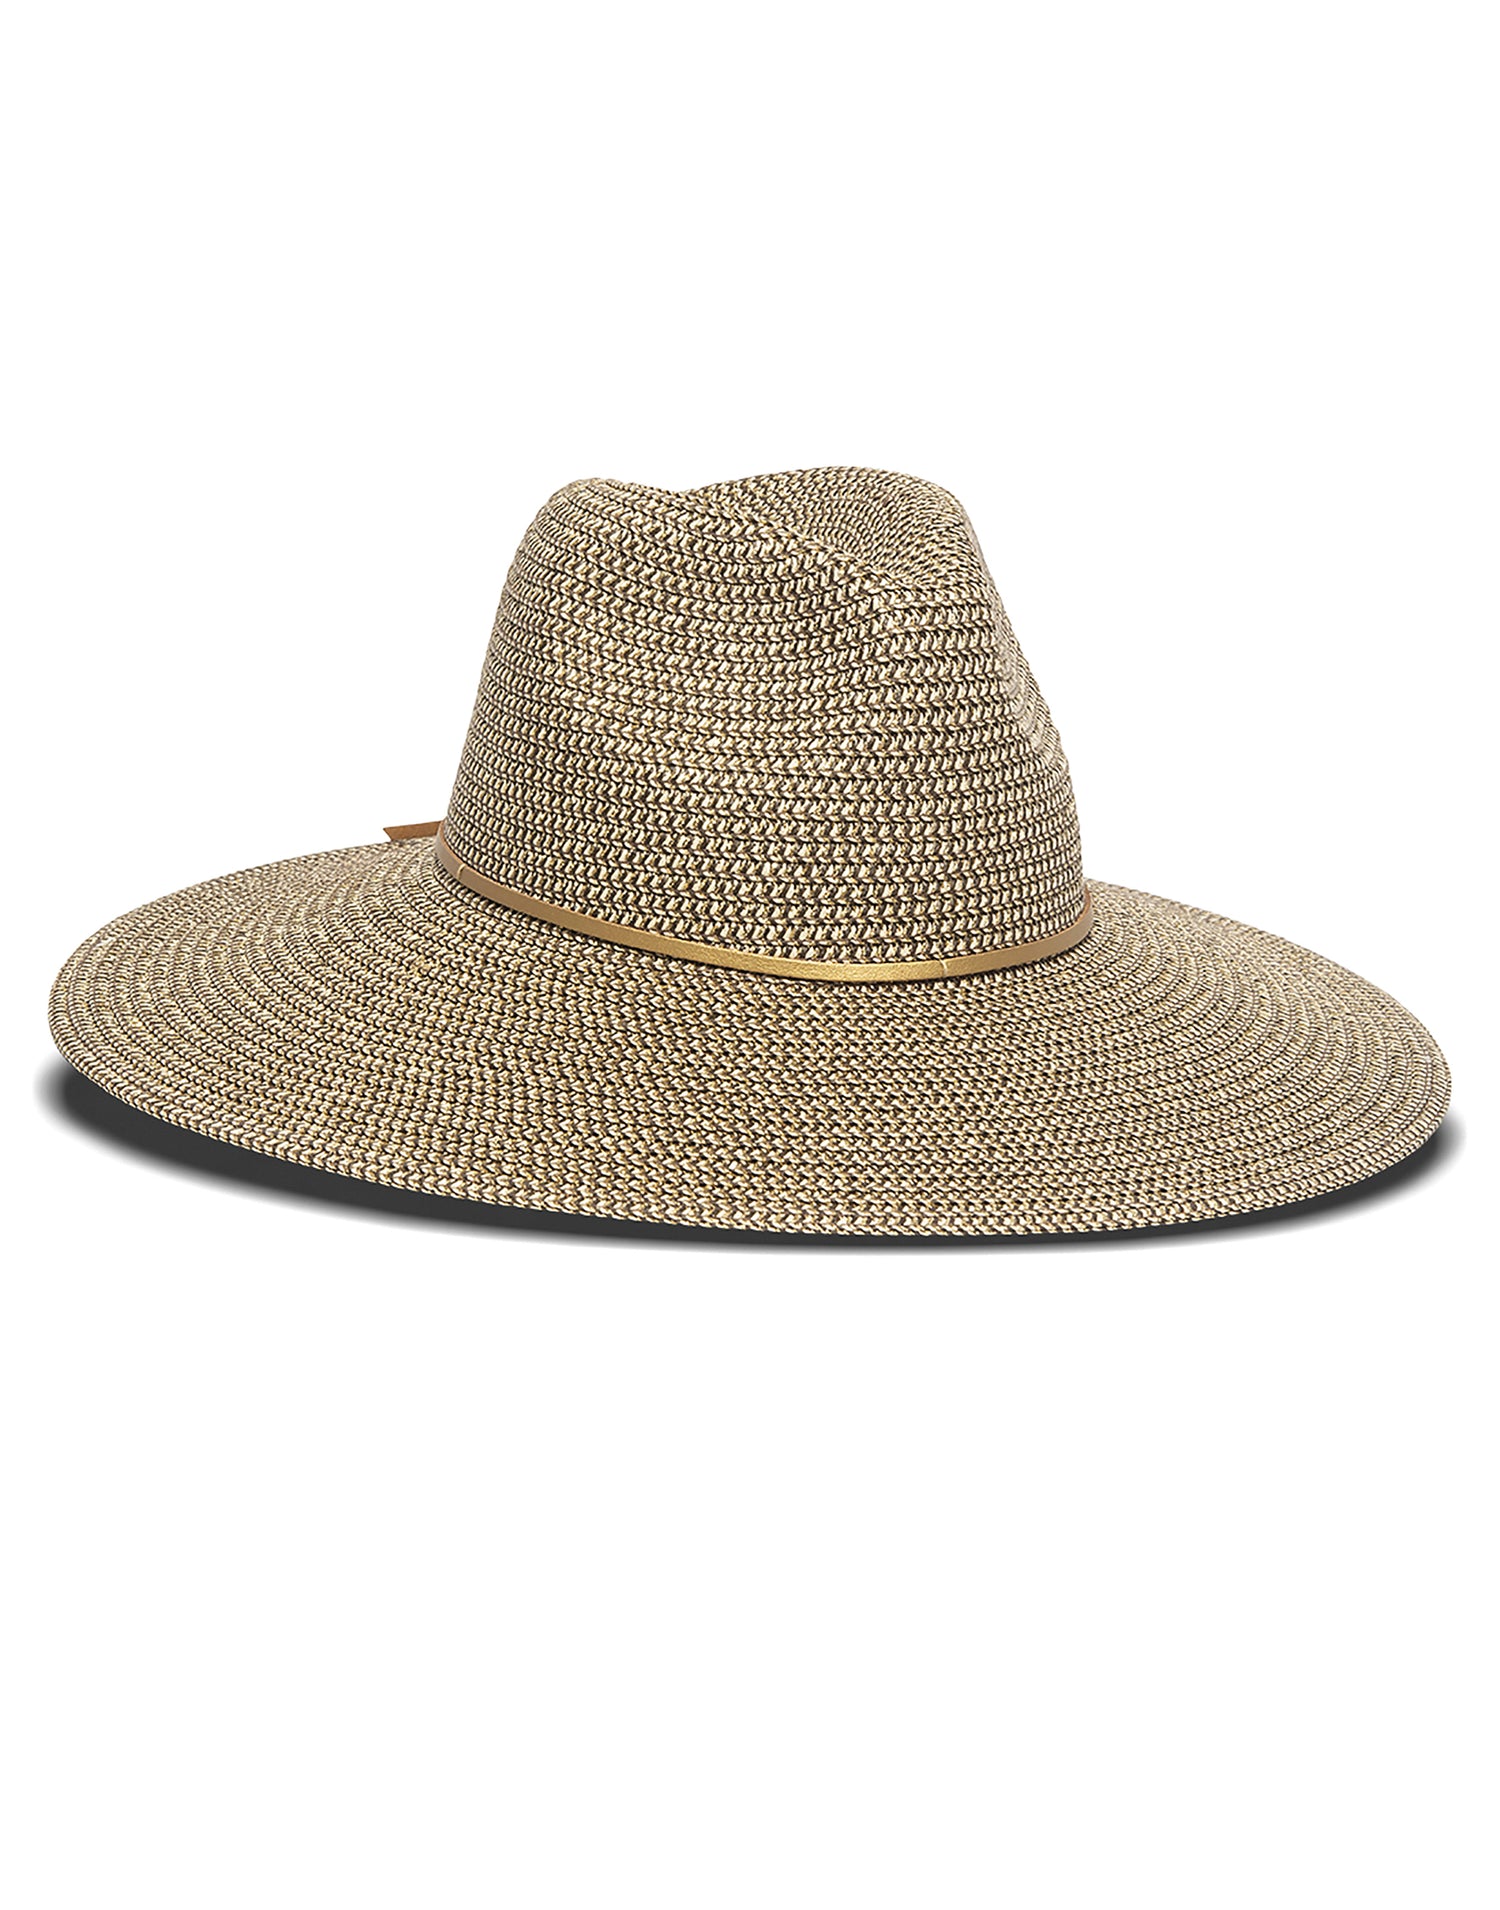 Nikki Beach's Harper Fedora in Gold with Leather Trim - product view